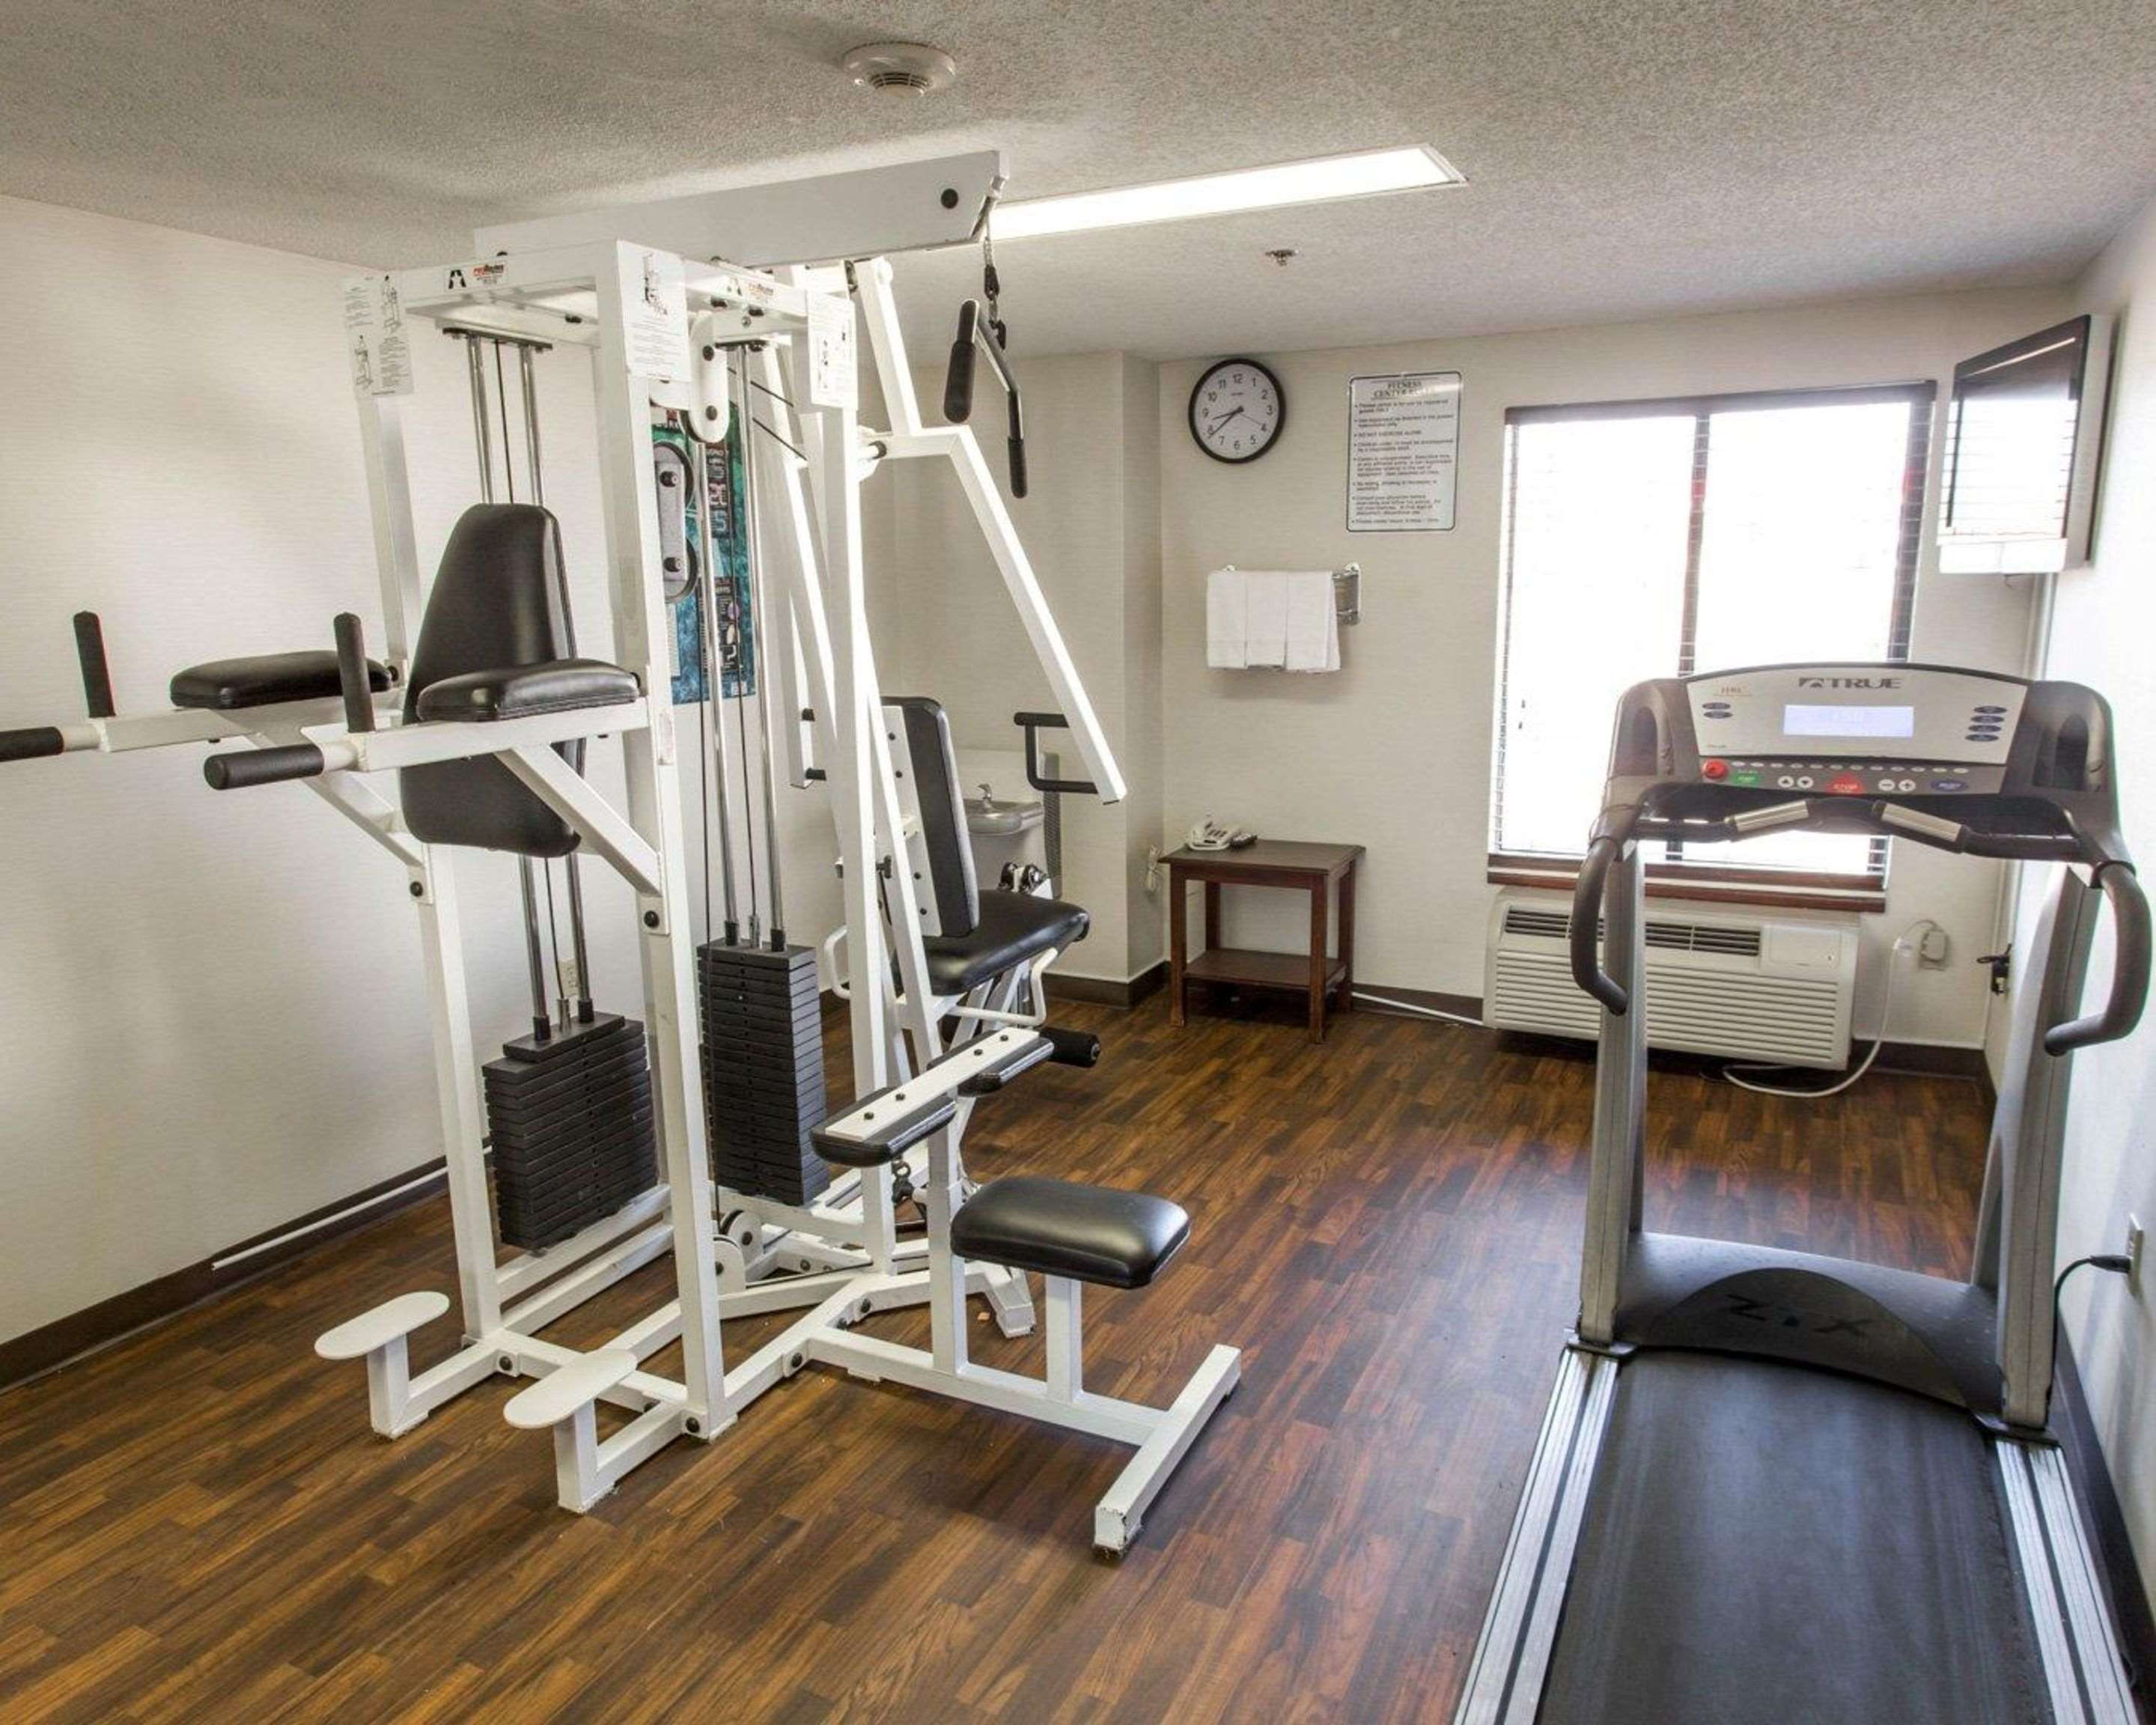 Exercise room with cardio equipment and weights